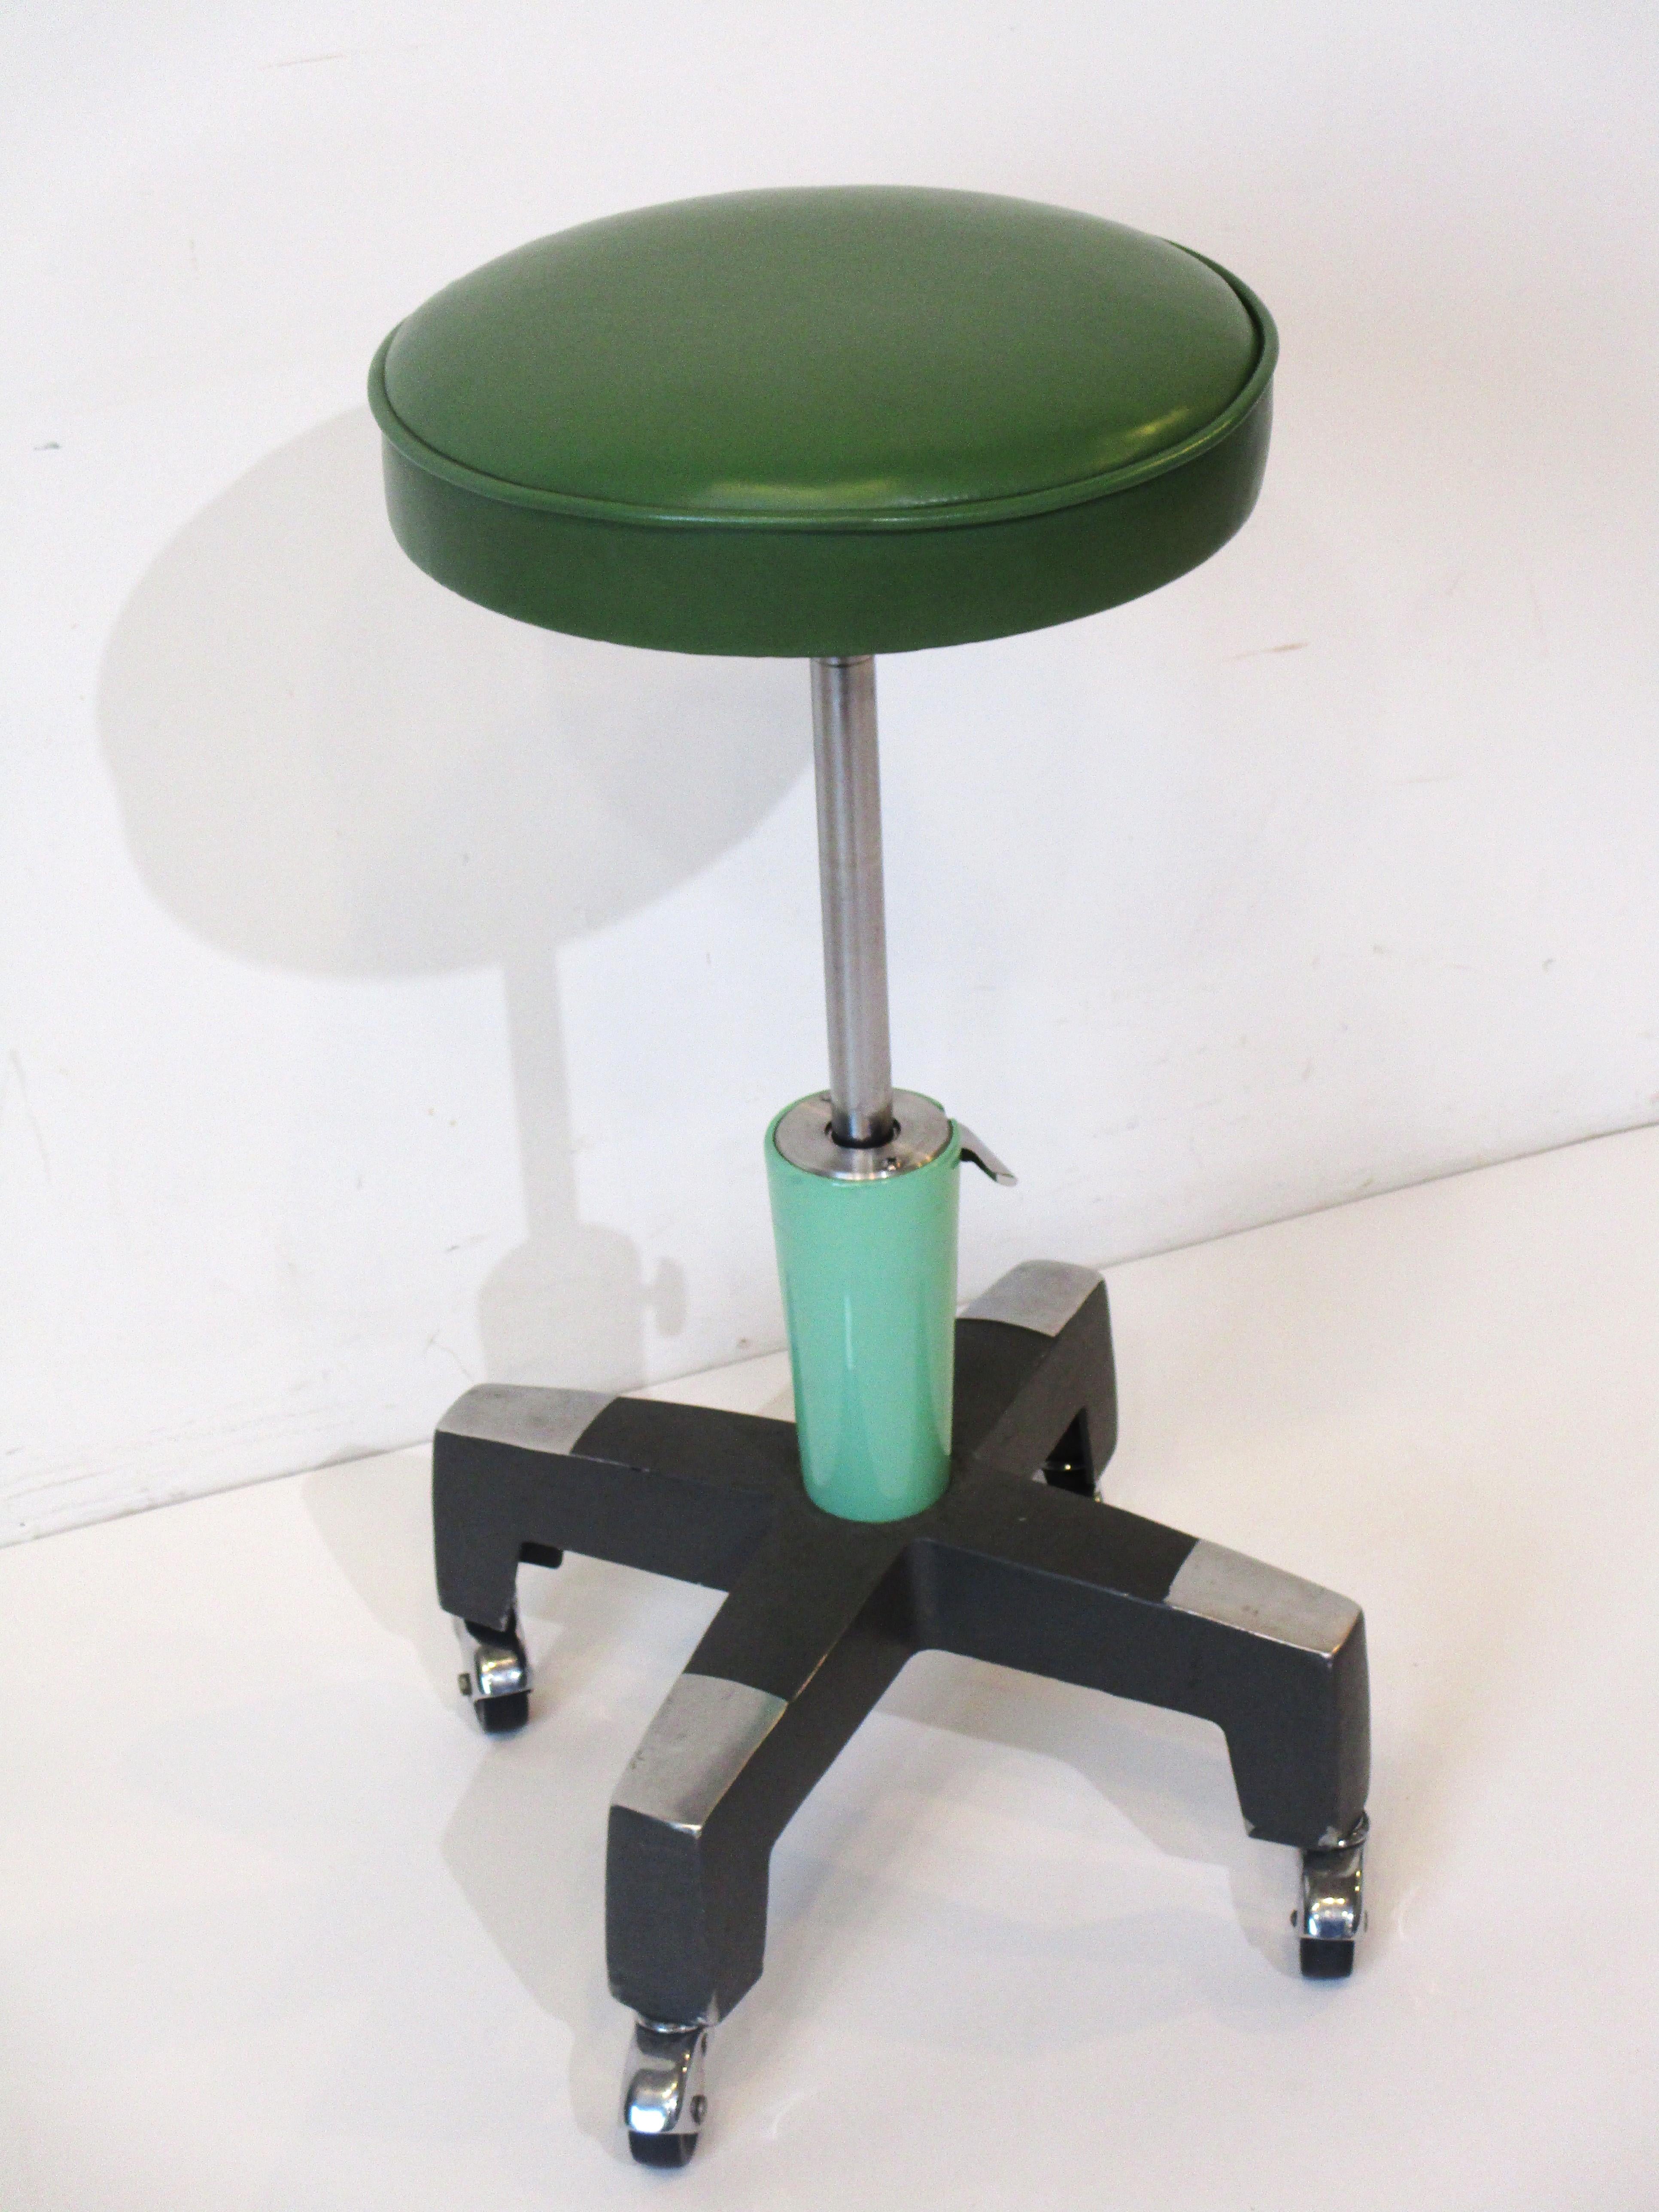 A Machine Age / Art Deco styled rolling adjustable height upholstered stool with green leatherette seat and accents . On a heavy cast steel and aluminum star base with black wheels and chrome wheel fenders having hydraulic adjustments from 19